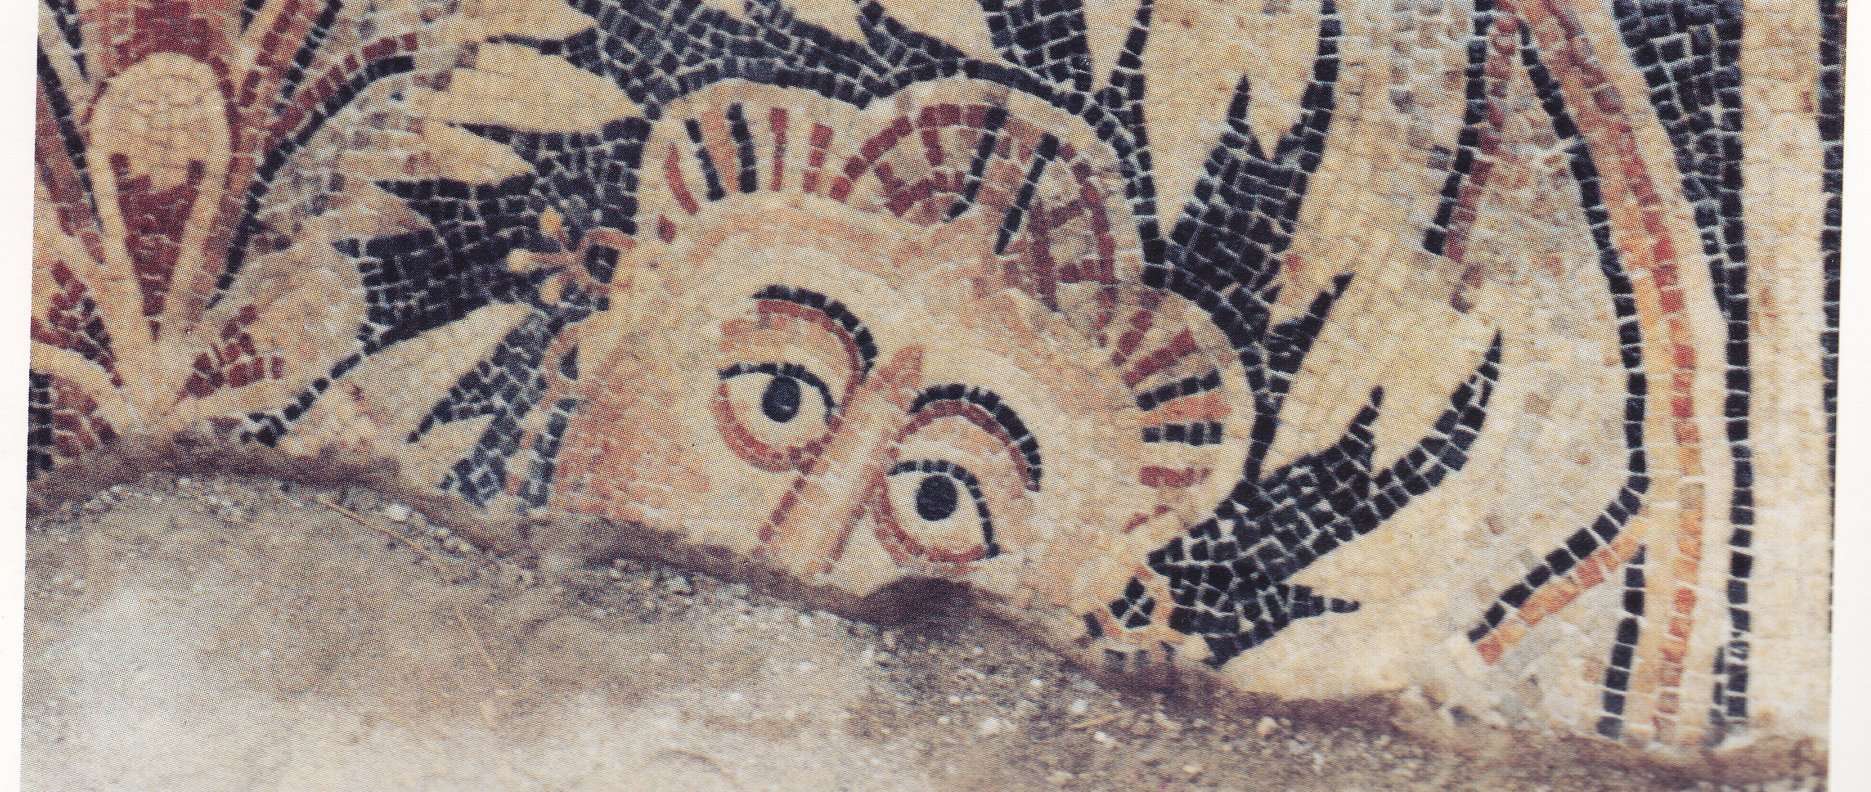 Personification of a Season from the Burnt Palace; photo by Mary Scott, from Madaba Cultural Heritage (1996).